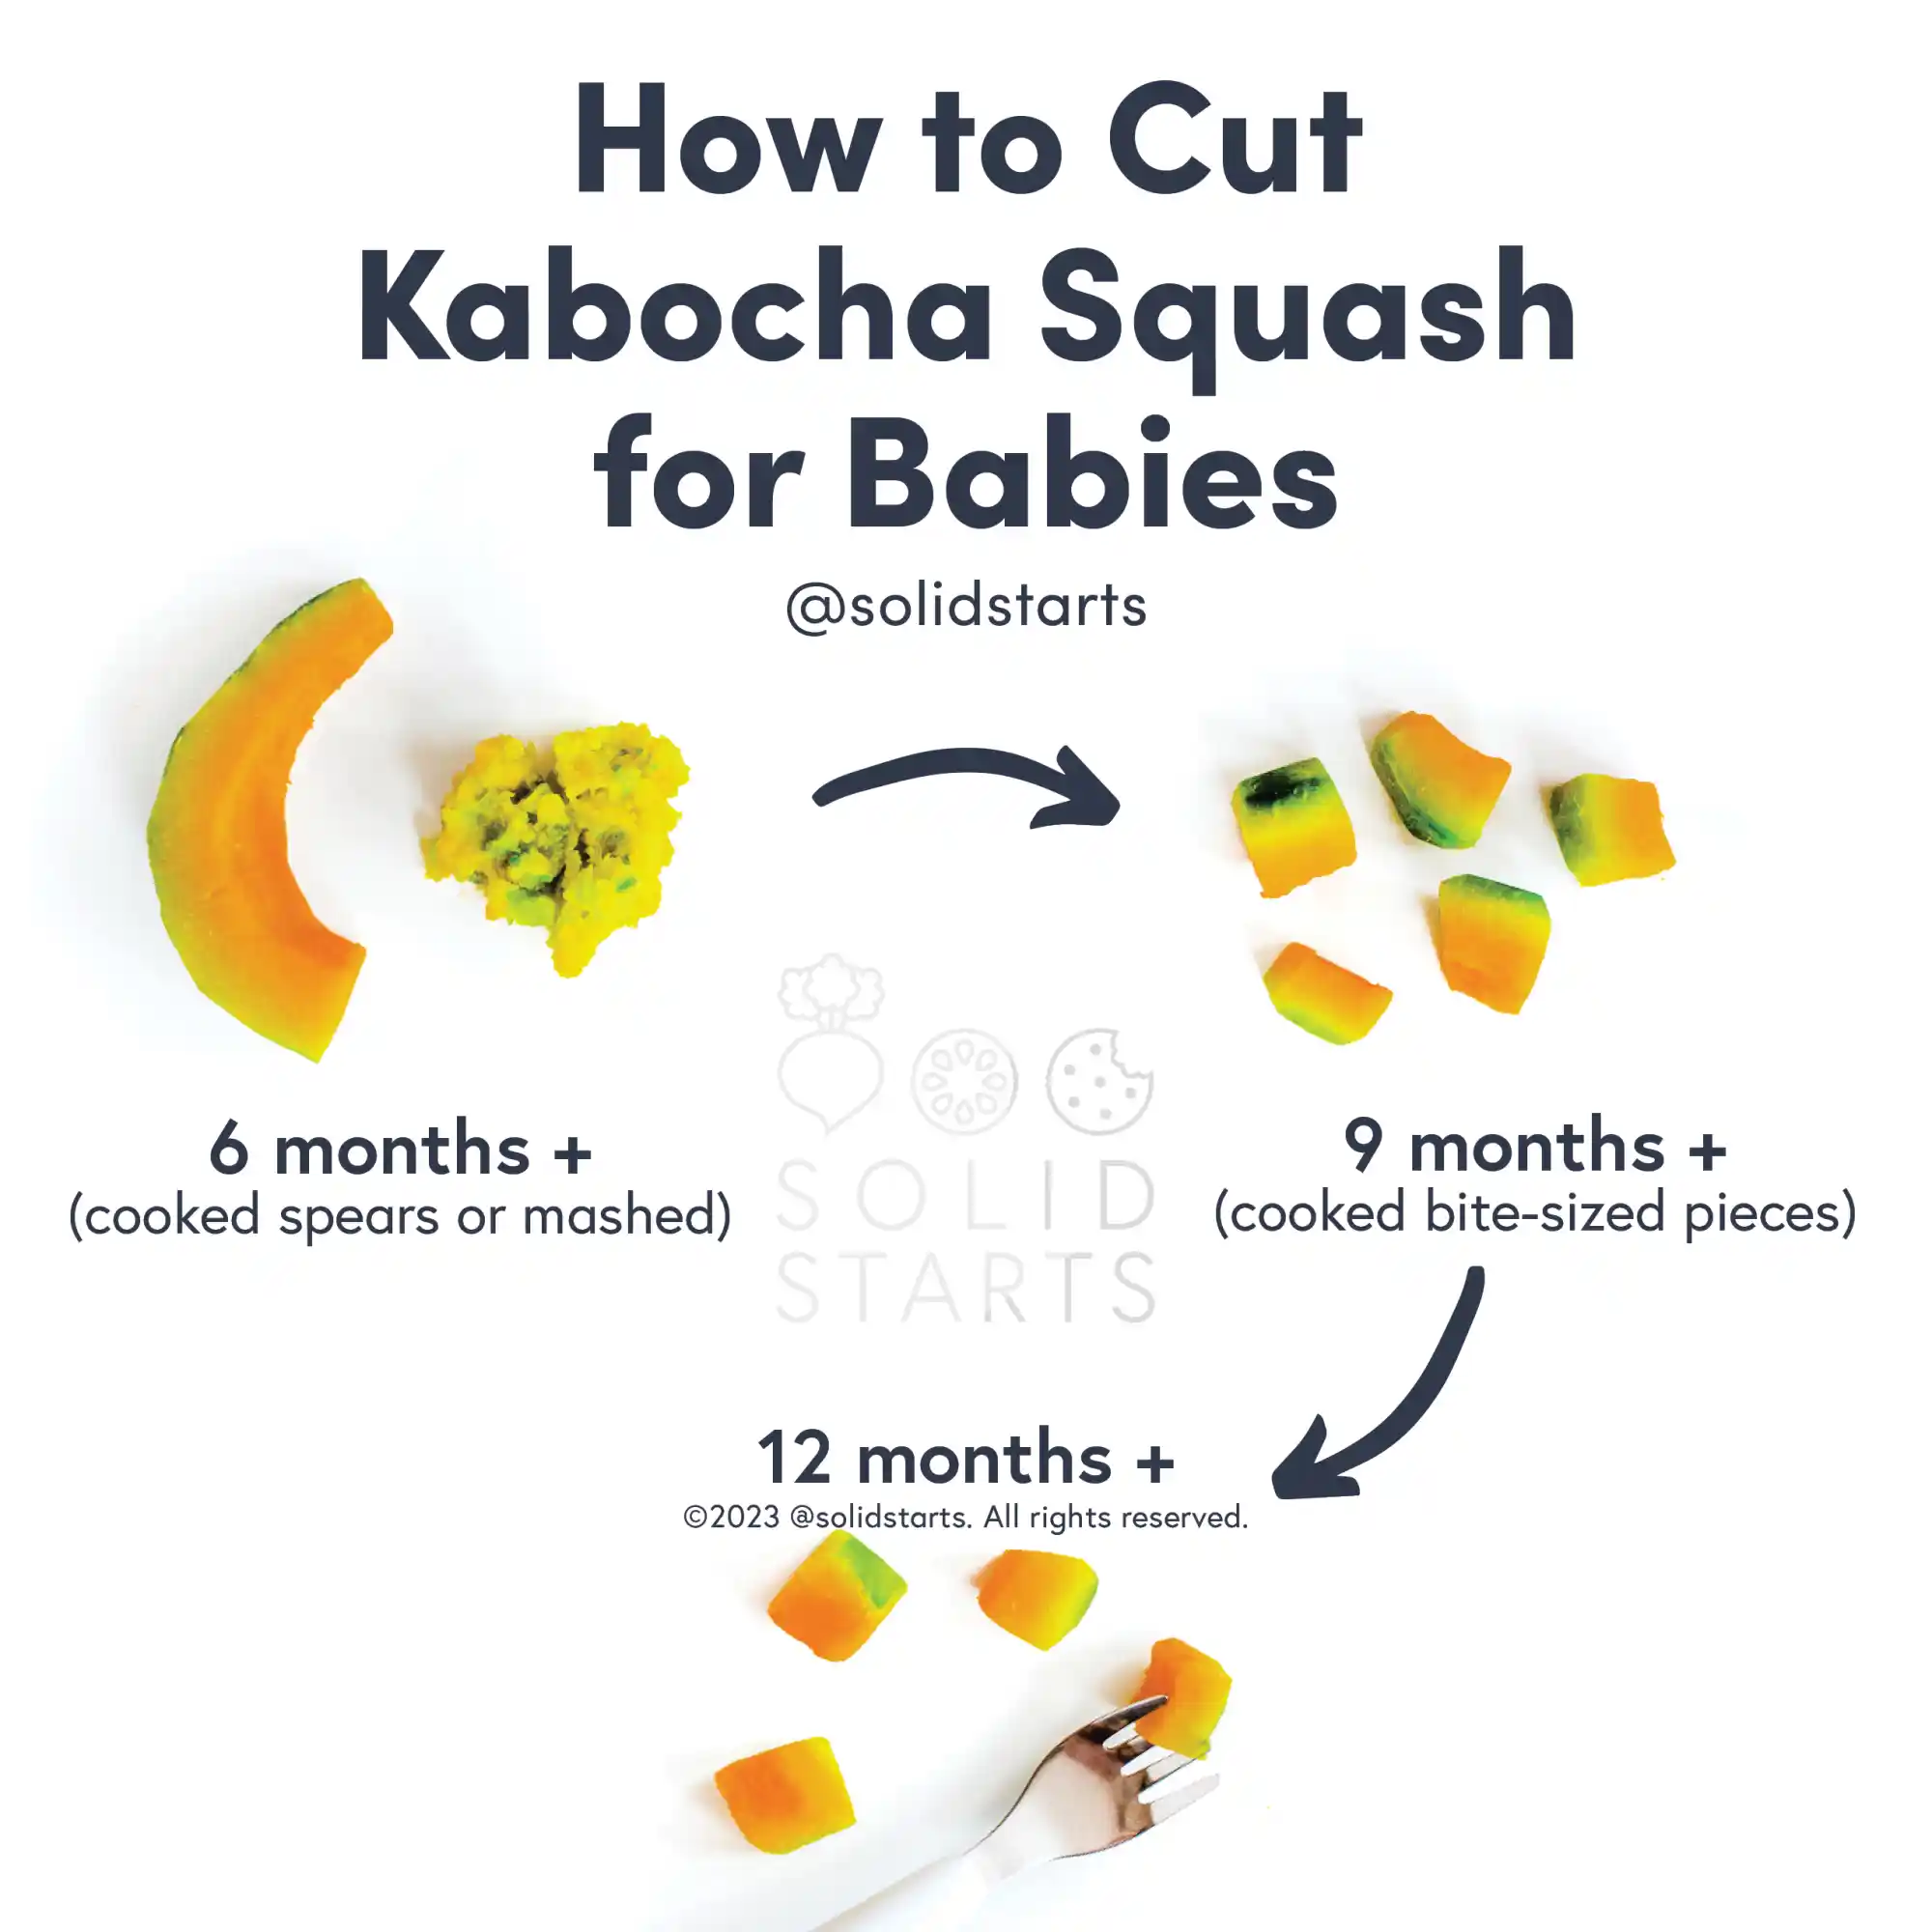 a Solid Starts infographic with the header How to Kabocha Squash for Babies: cooked spears or mashed for 6 mos+, cooked bite-sized pieces for 9 mos+, and bite-sized with a utensil for 12 mos+